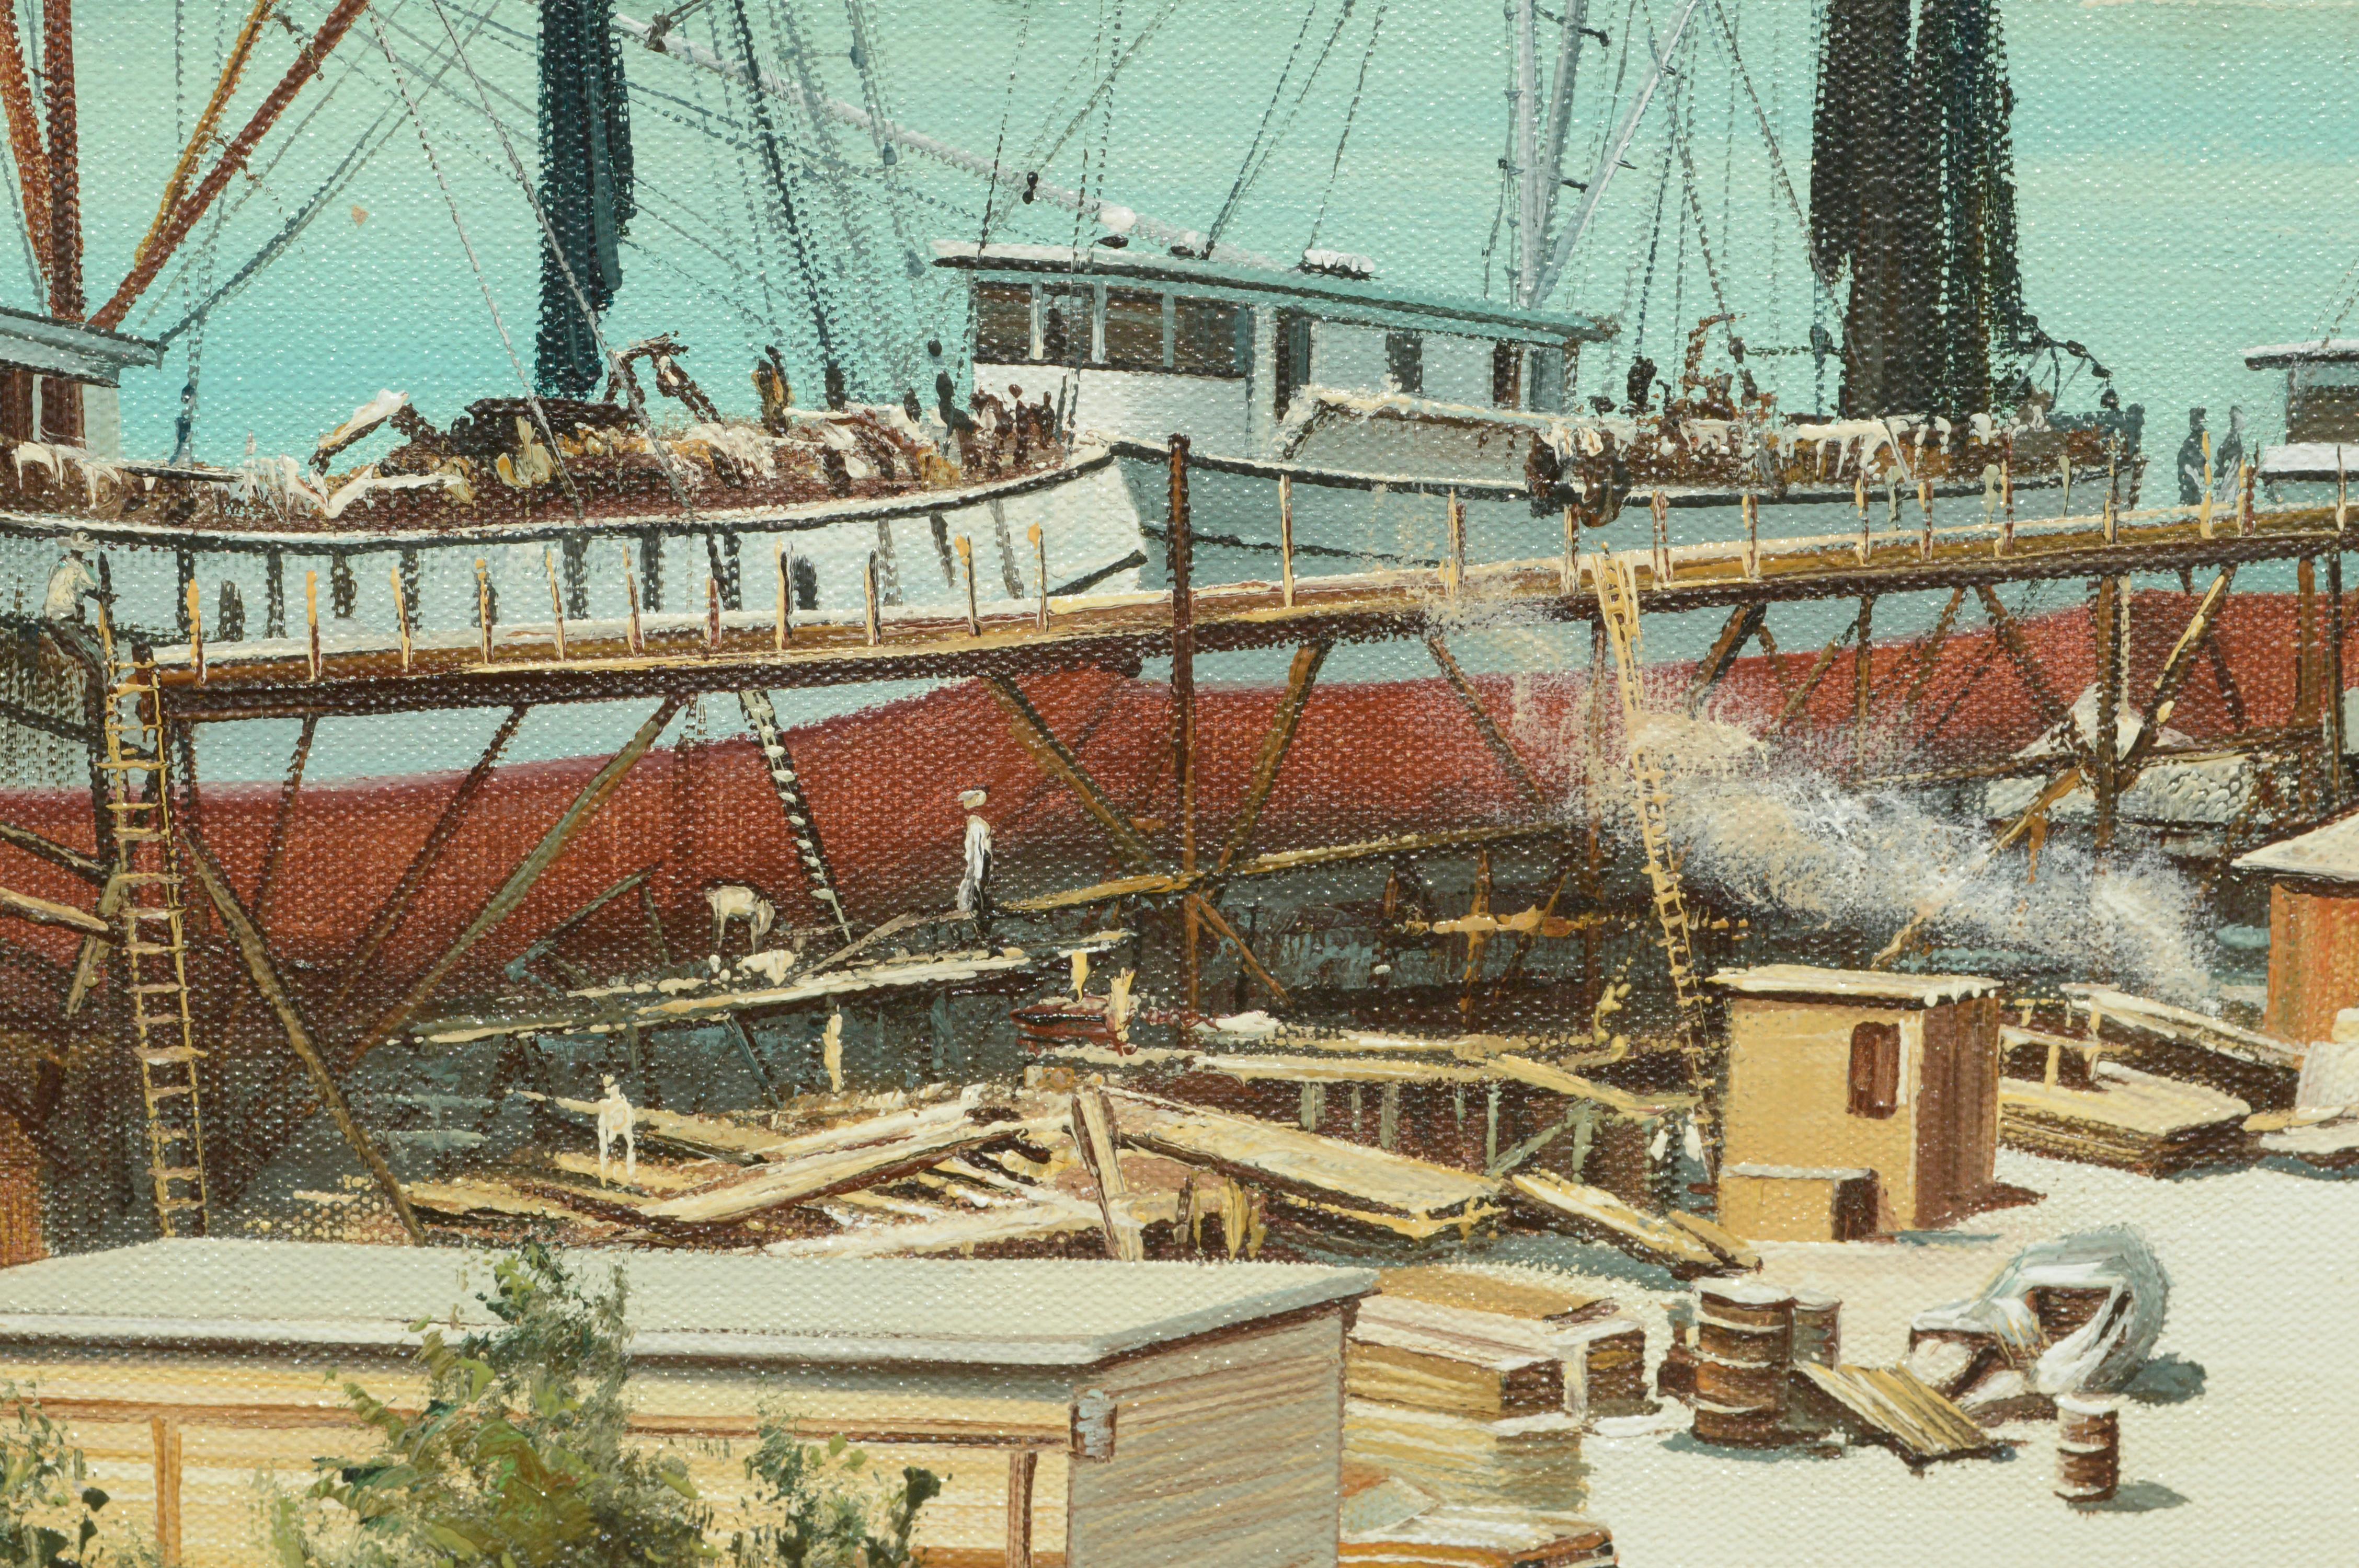 Gulf Star at the Dock - Painting by S. Wenly